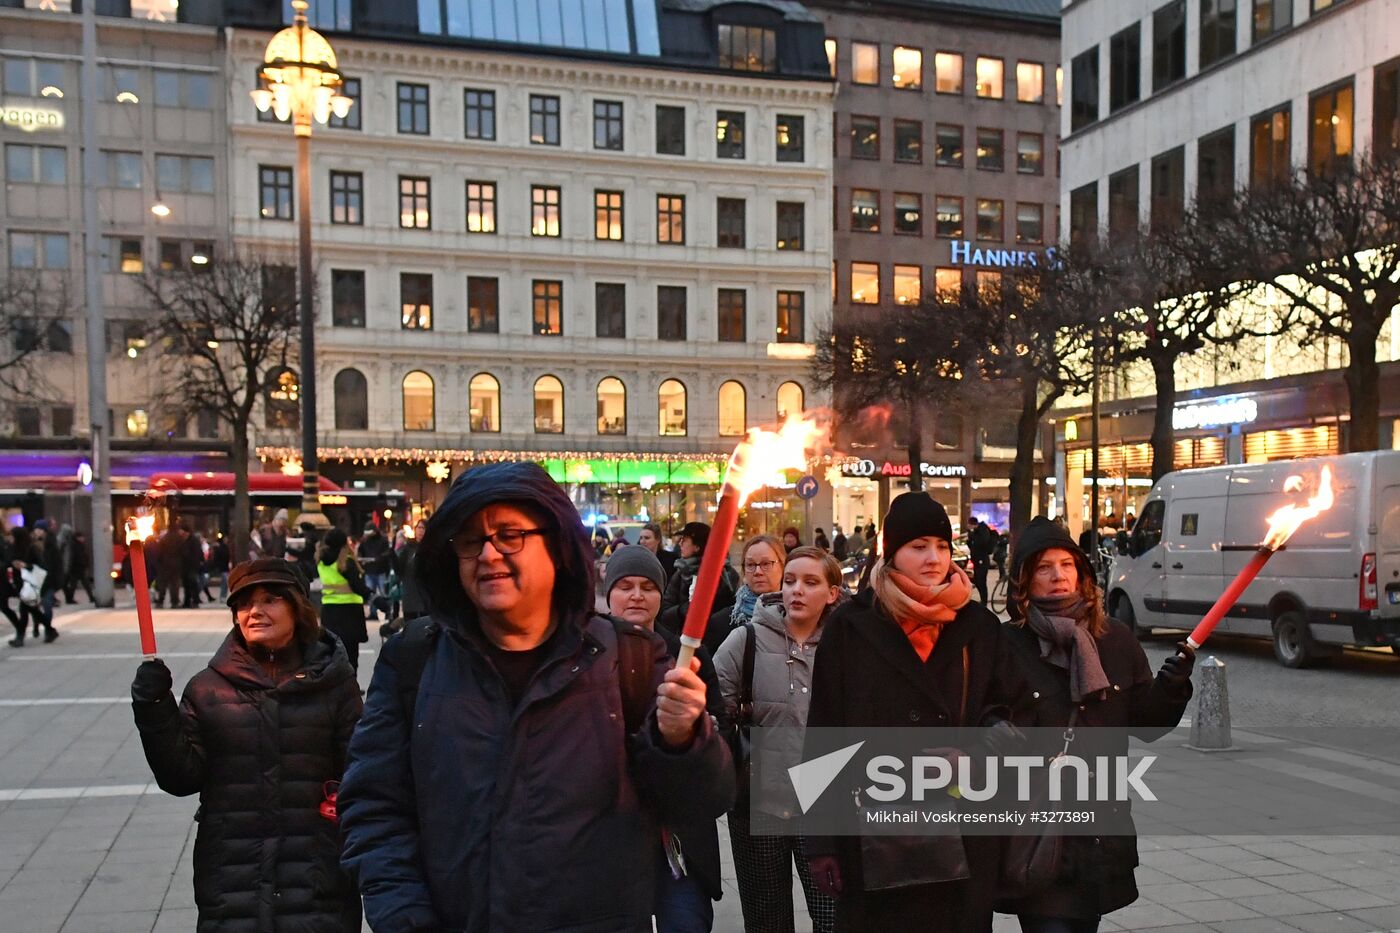 Rally to protest sexual abuse in Stockholm